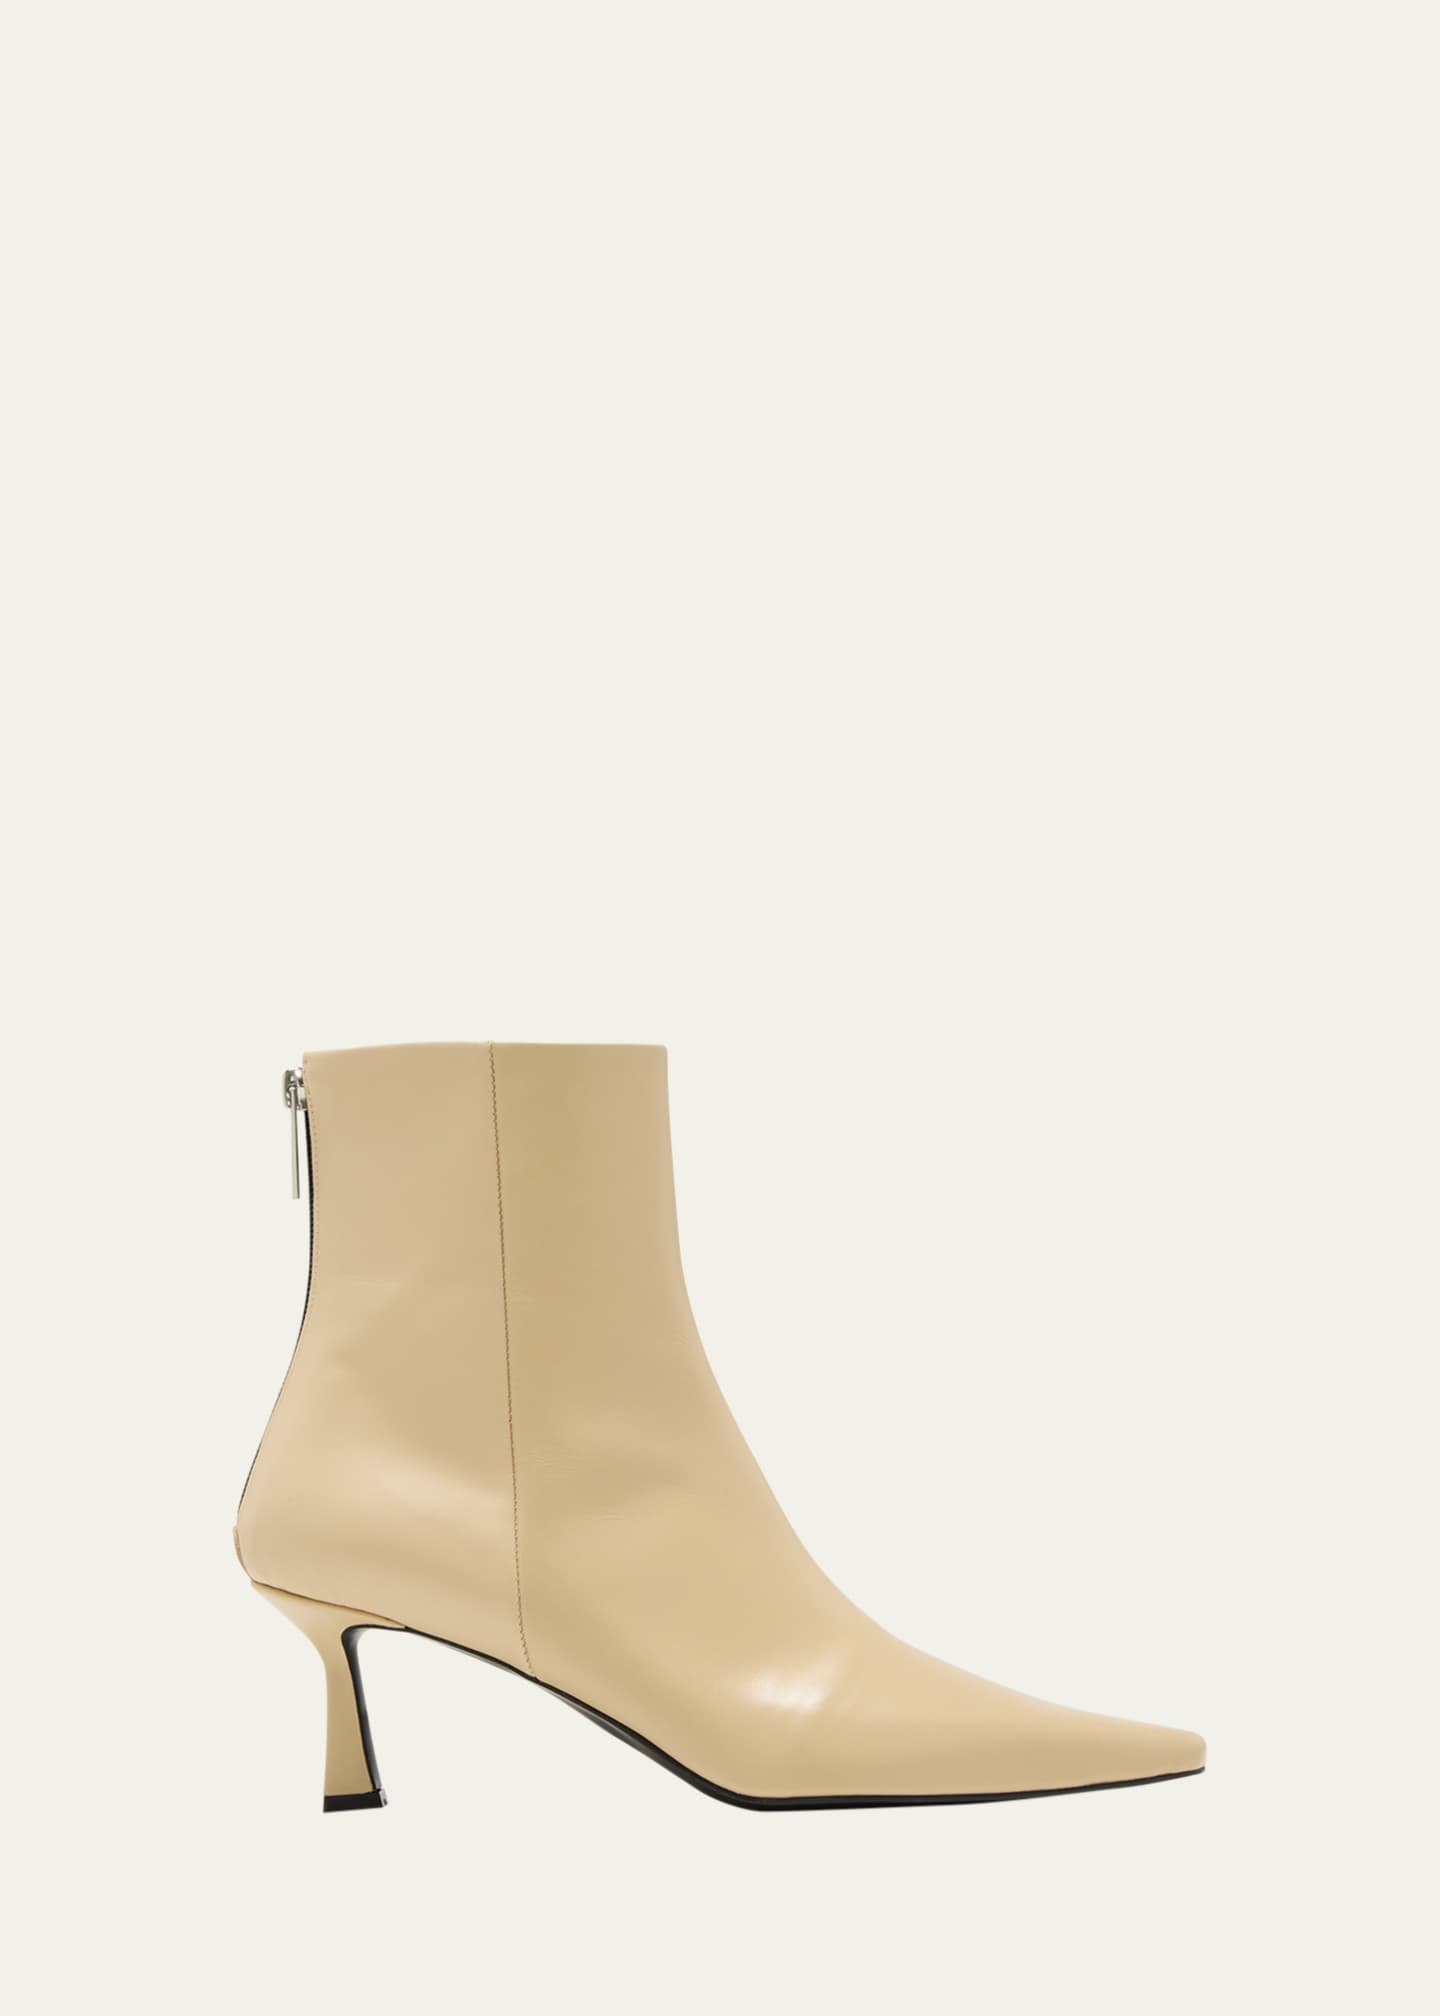 Reike Nen Leather Point-Toe Ankle Booties - Bergdorf Goodman